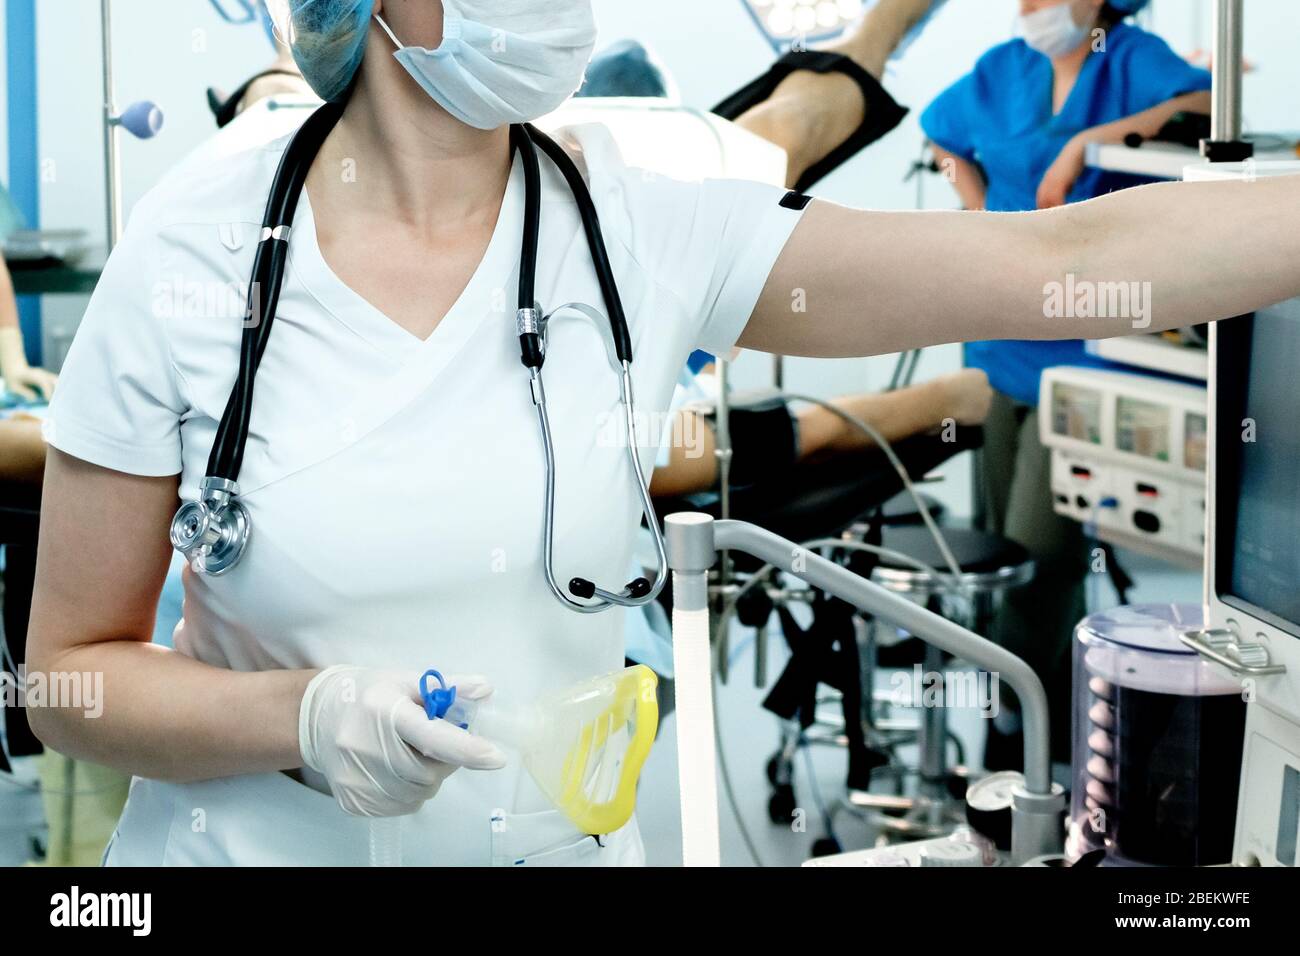 An intensive care physician prepares equipment for artificial ventilation of the lungs for intubation in a critical patient with coronavirus. COVID-19 Stock Photo